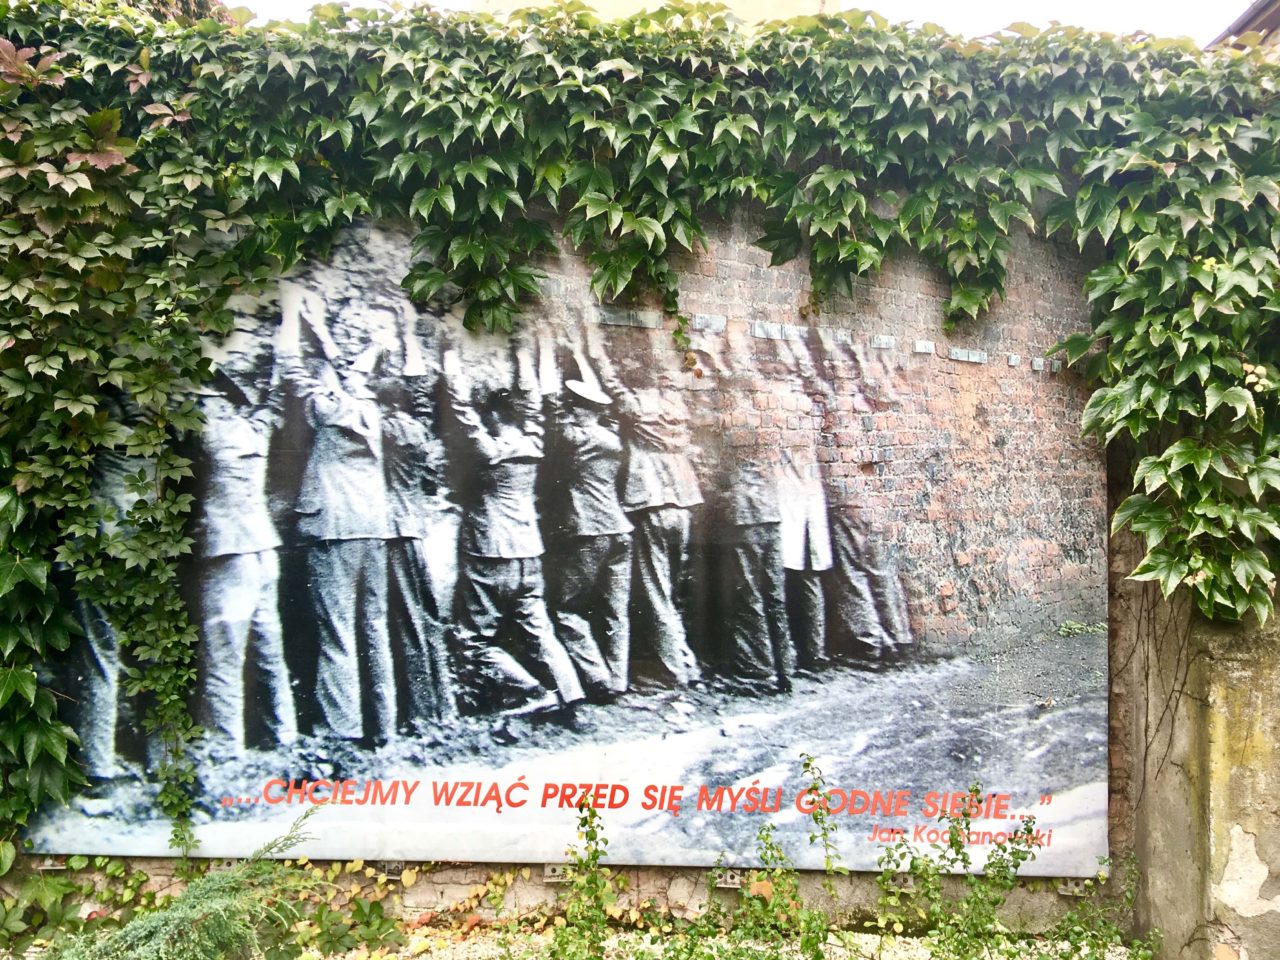 The photograph showing the surrendered postal workers against the wall